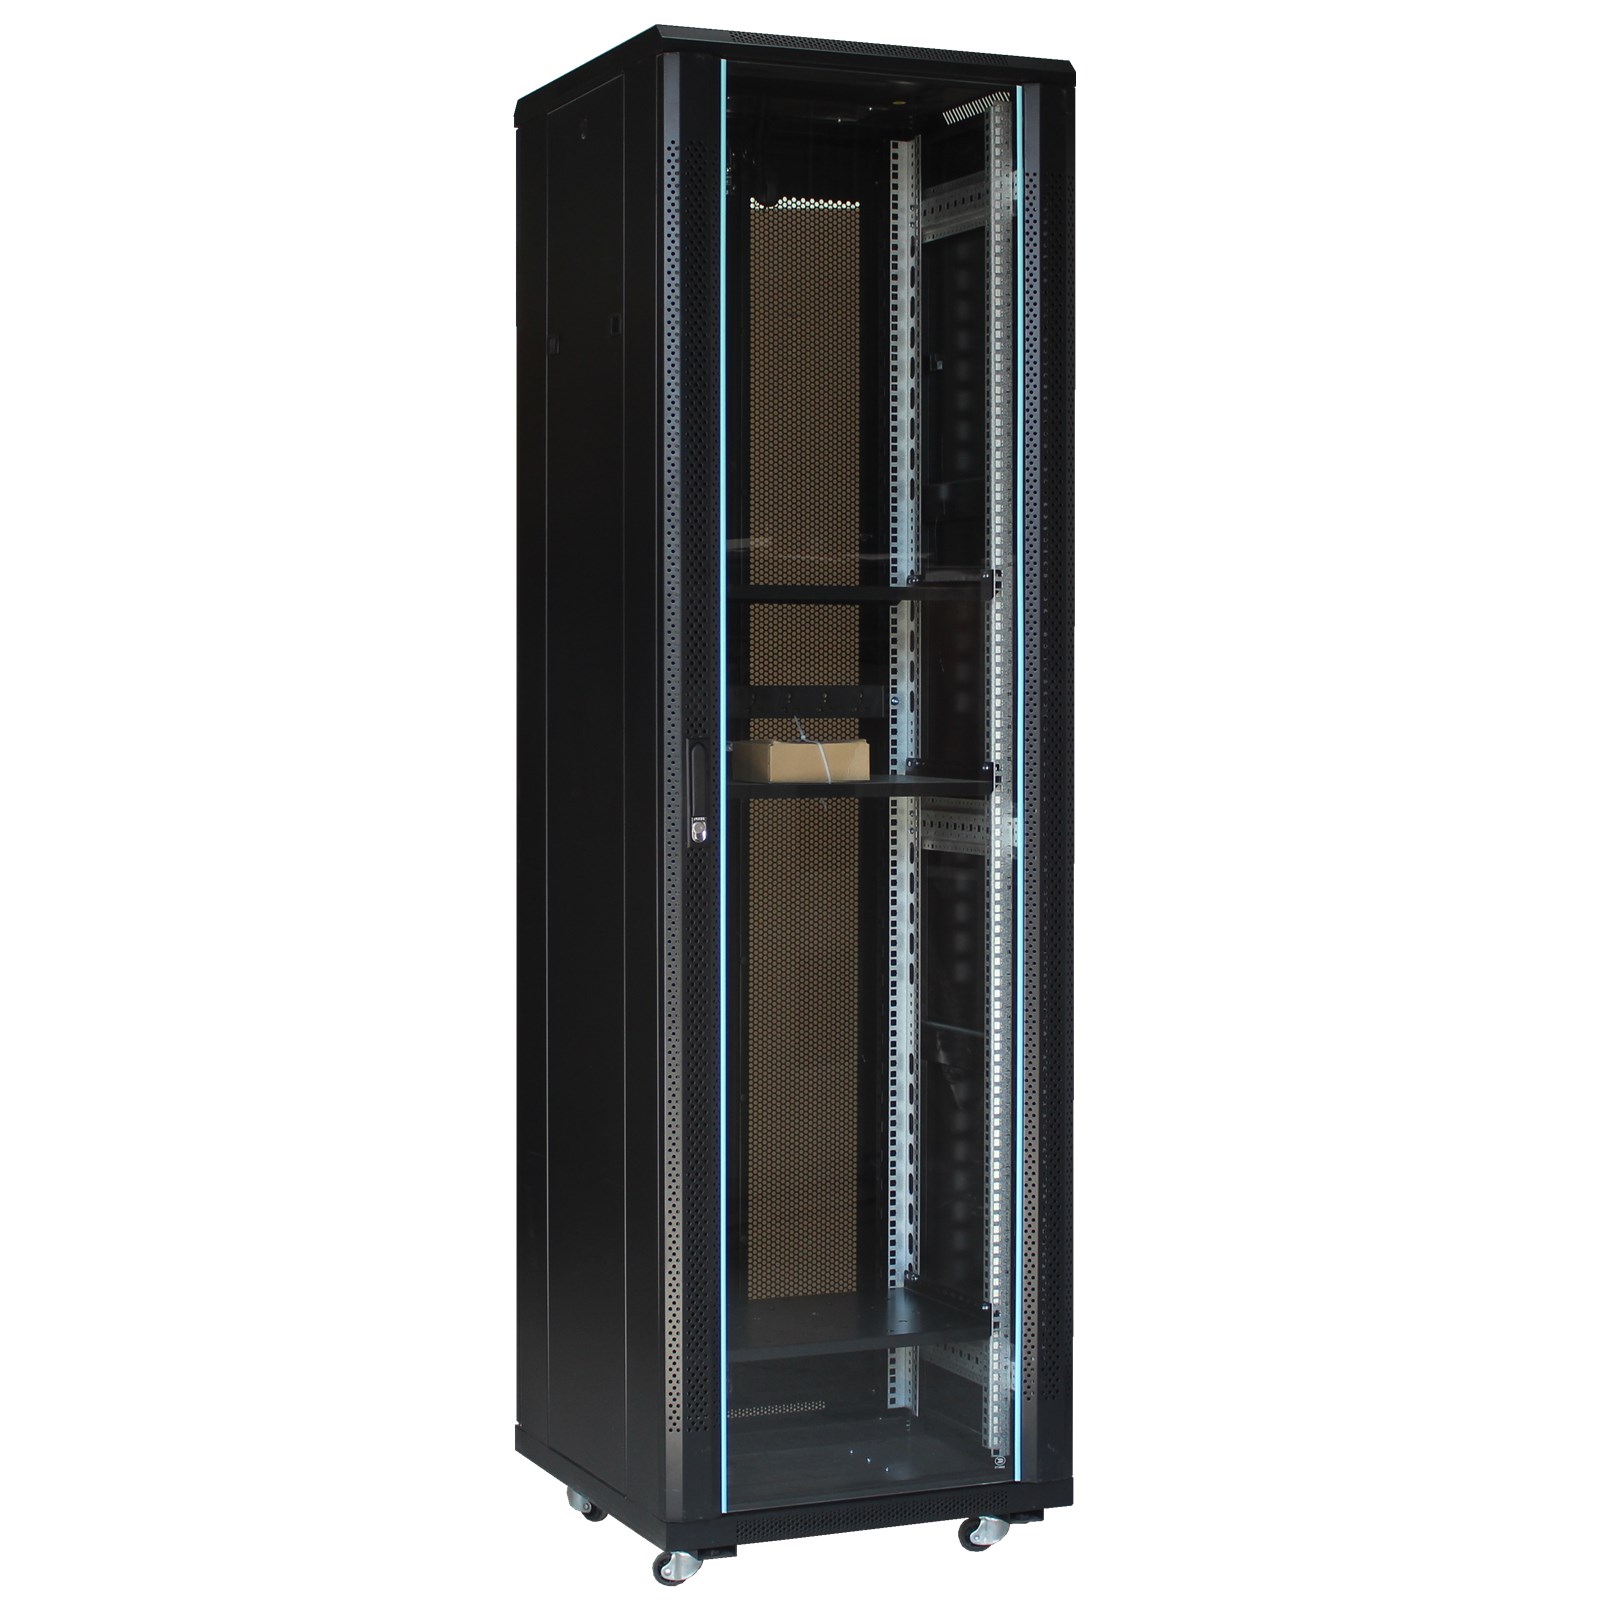 What Kind of Cabinet is Popular in Cloud Computing Era? 